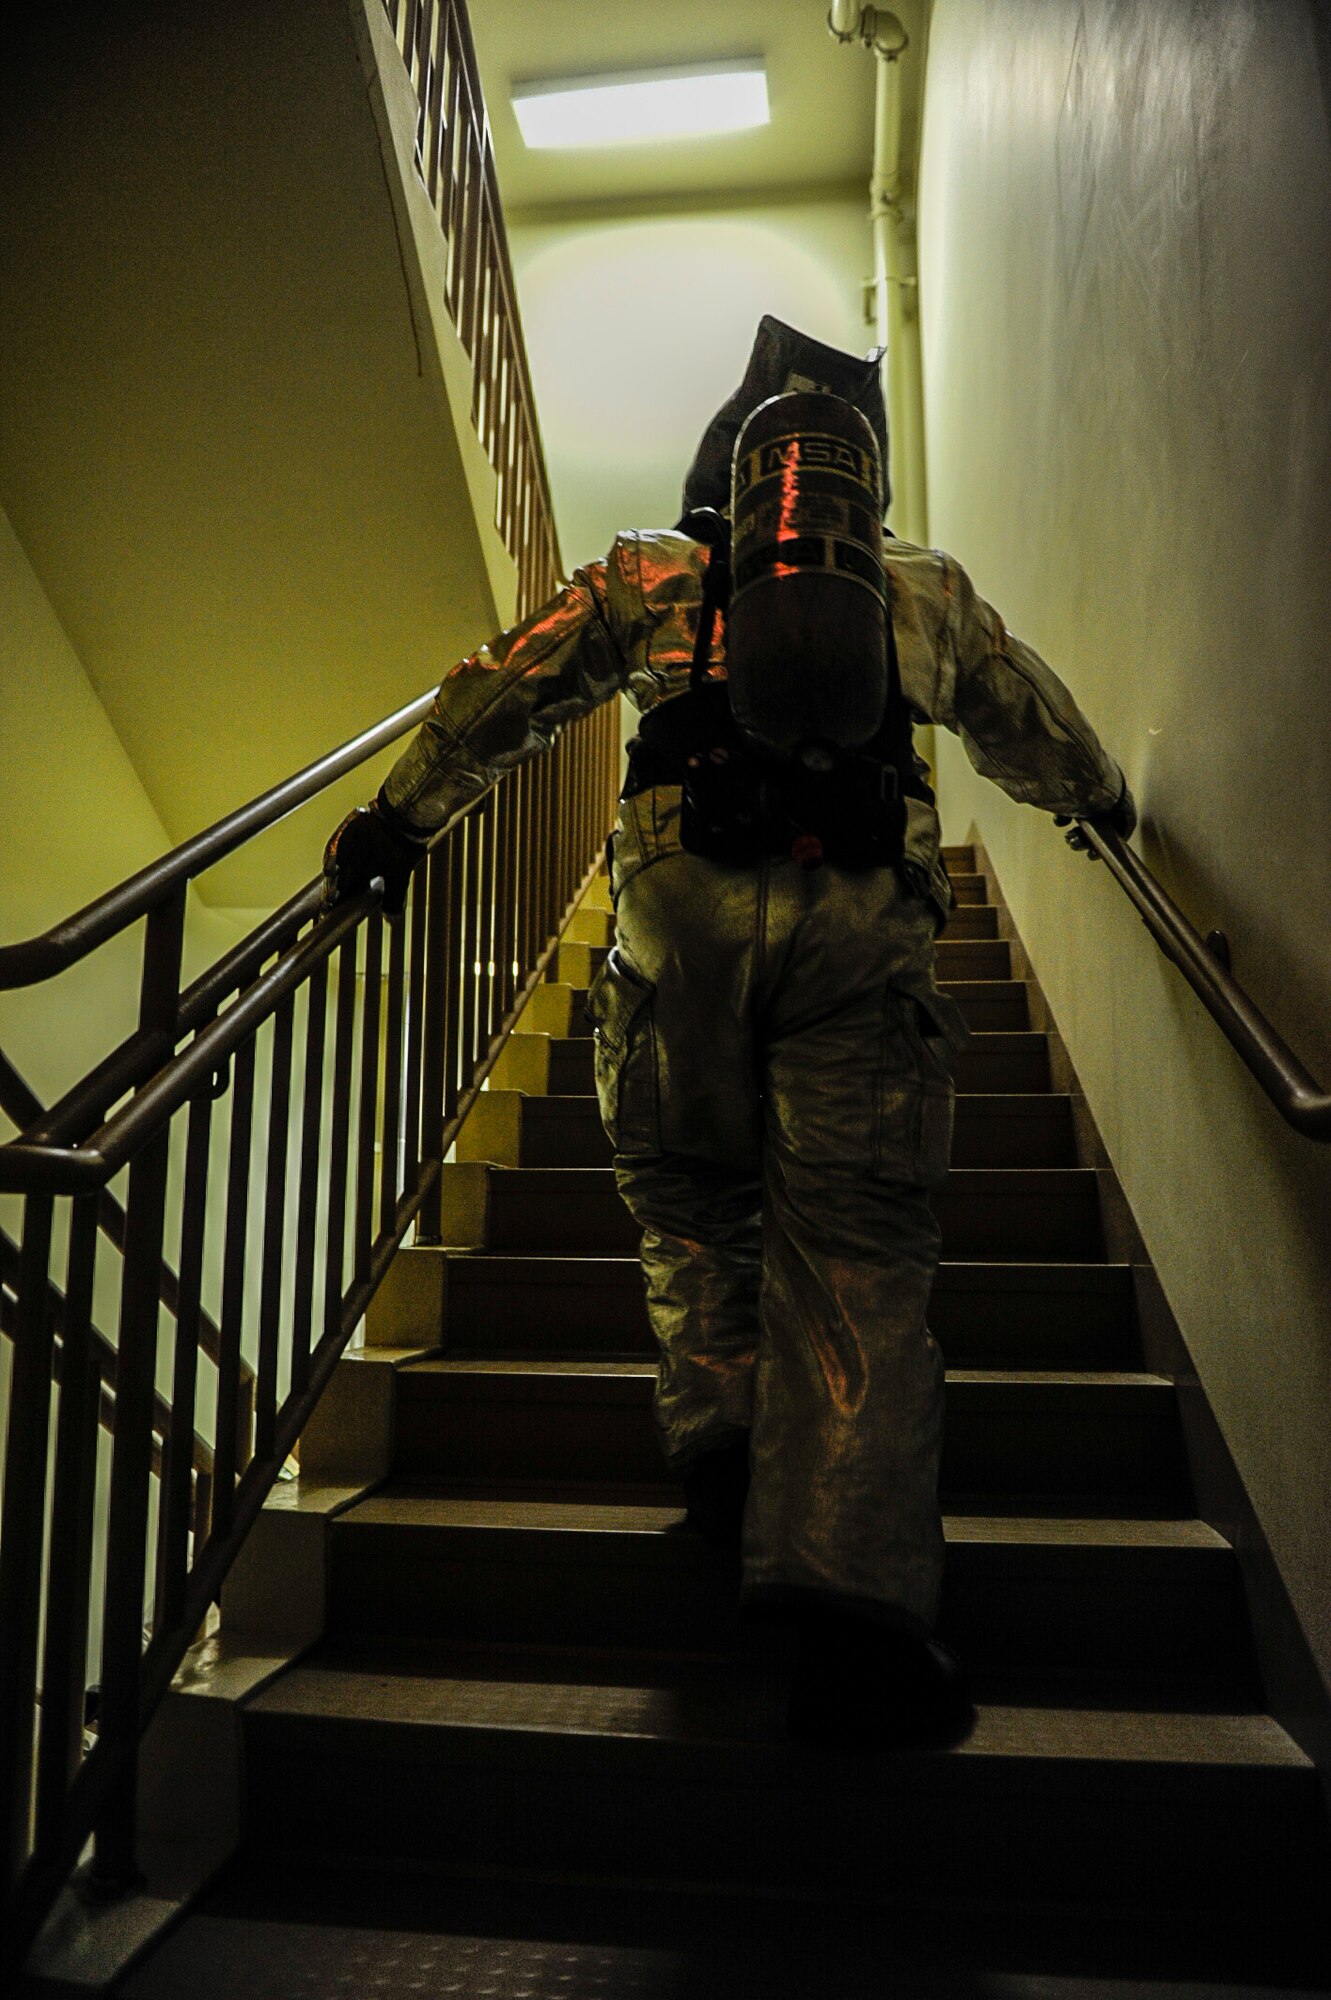 A U.S. Air Force firefighter from the 8th Civil Engineer Squadron climbs up a flight of stairs at Kunsan Air Base, Republic of Korea, Sept. 12, 2016. The 9/11 memorial stair climb event is a tribute to the 343 firefighters who gave their lives during the tragic events at the World Trade Center on September 11, 2001. (U.S. Air Force photo by Senior Airman Colville McFee/Released)